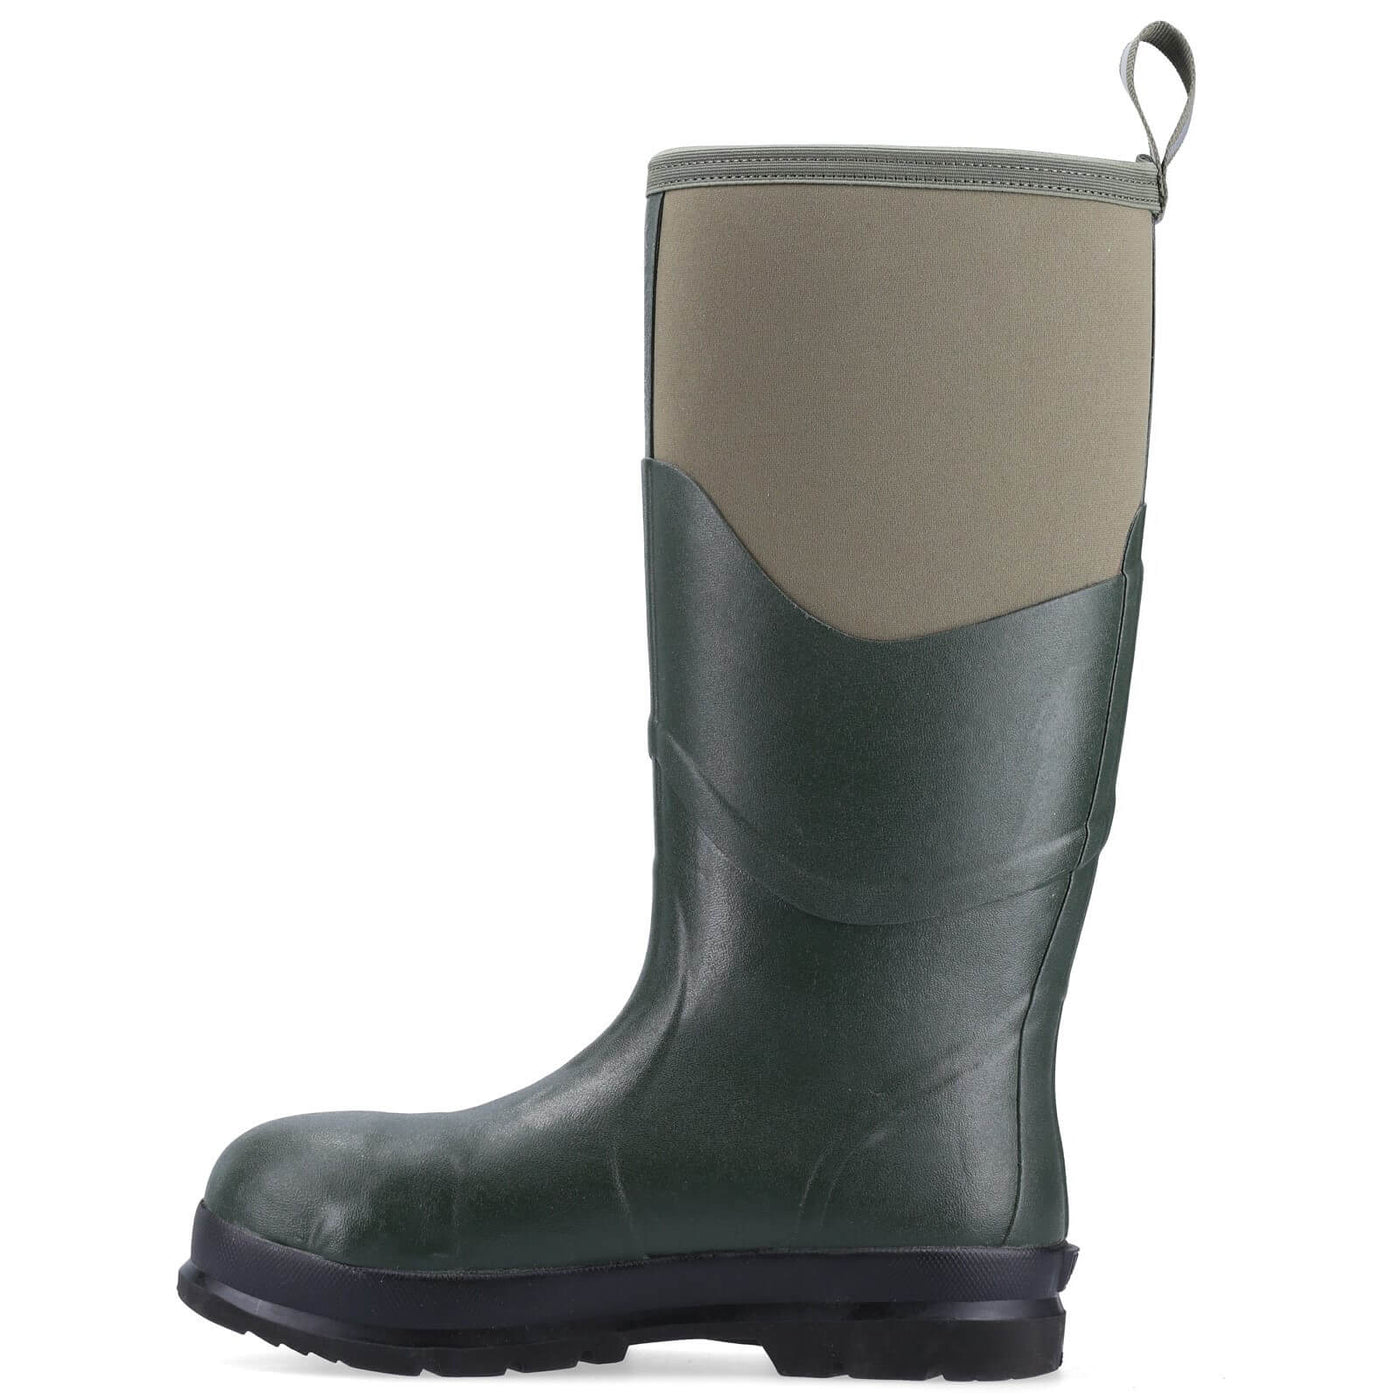 Muck Boots Chore Max S5 Safety Wellies Moss 7#colour_moss